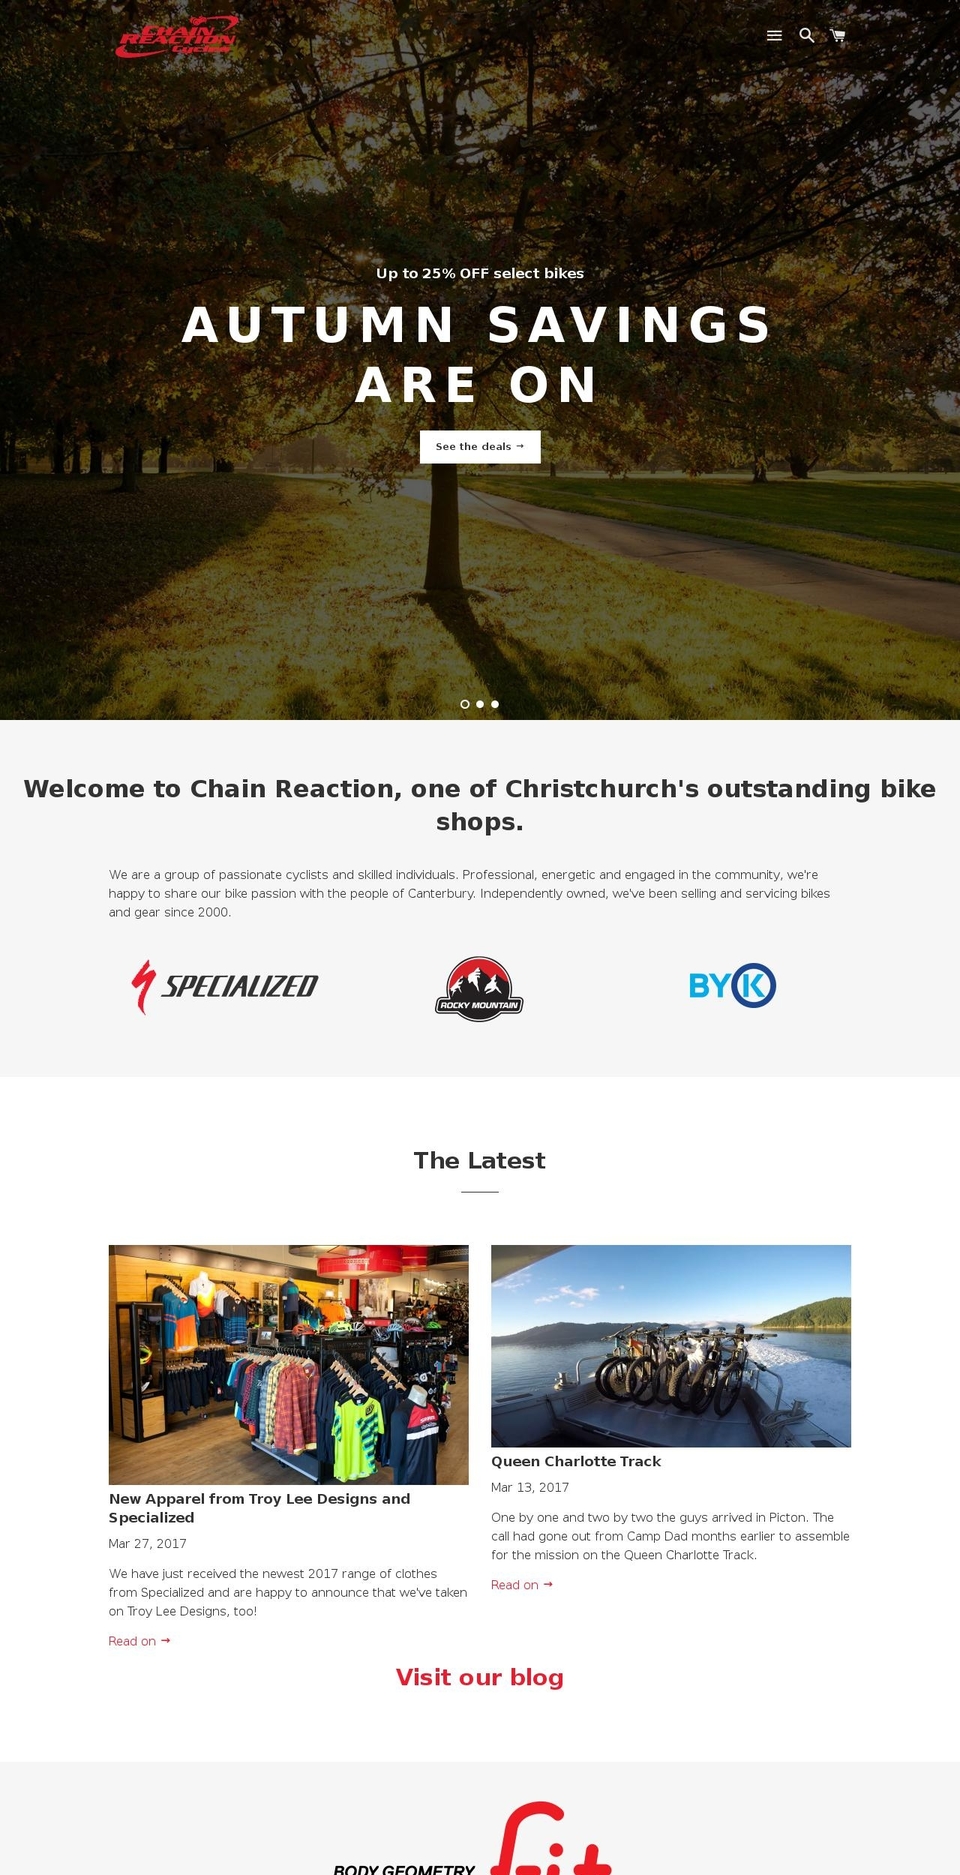 Impact Shopify theme site example chainreaction.co.nz